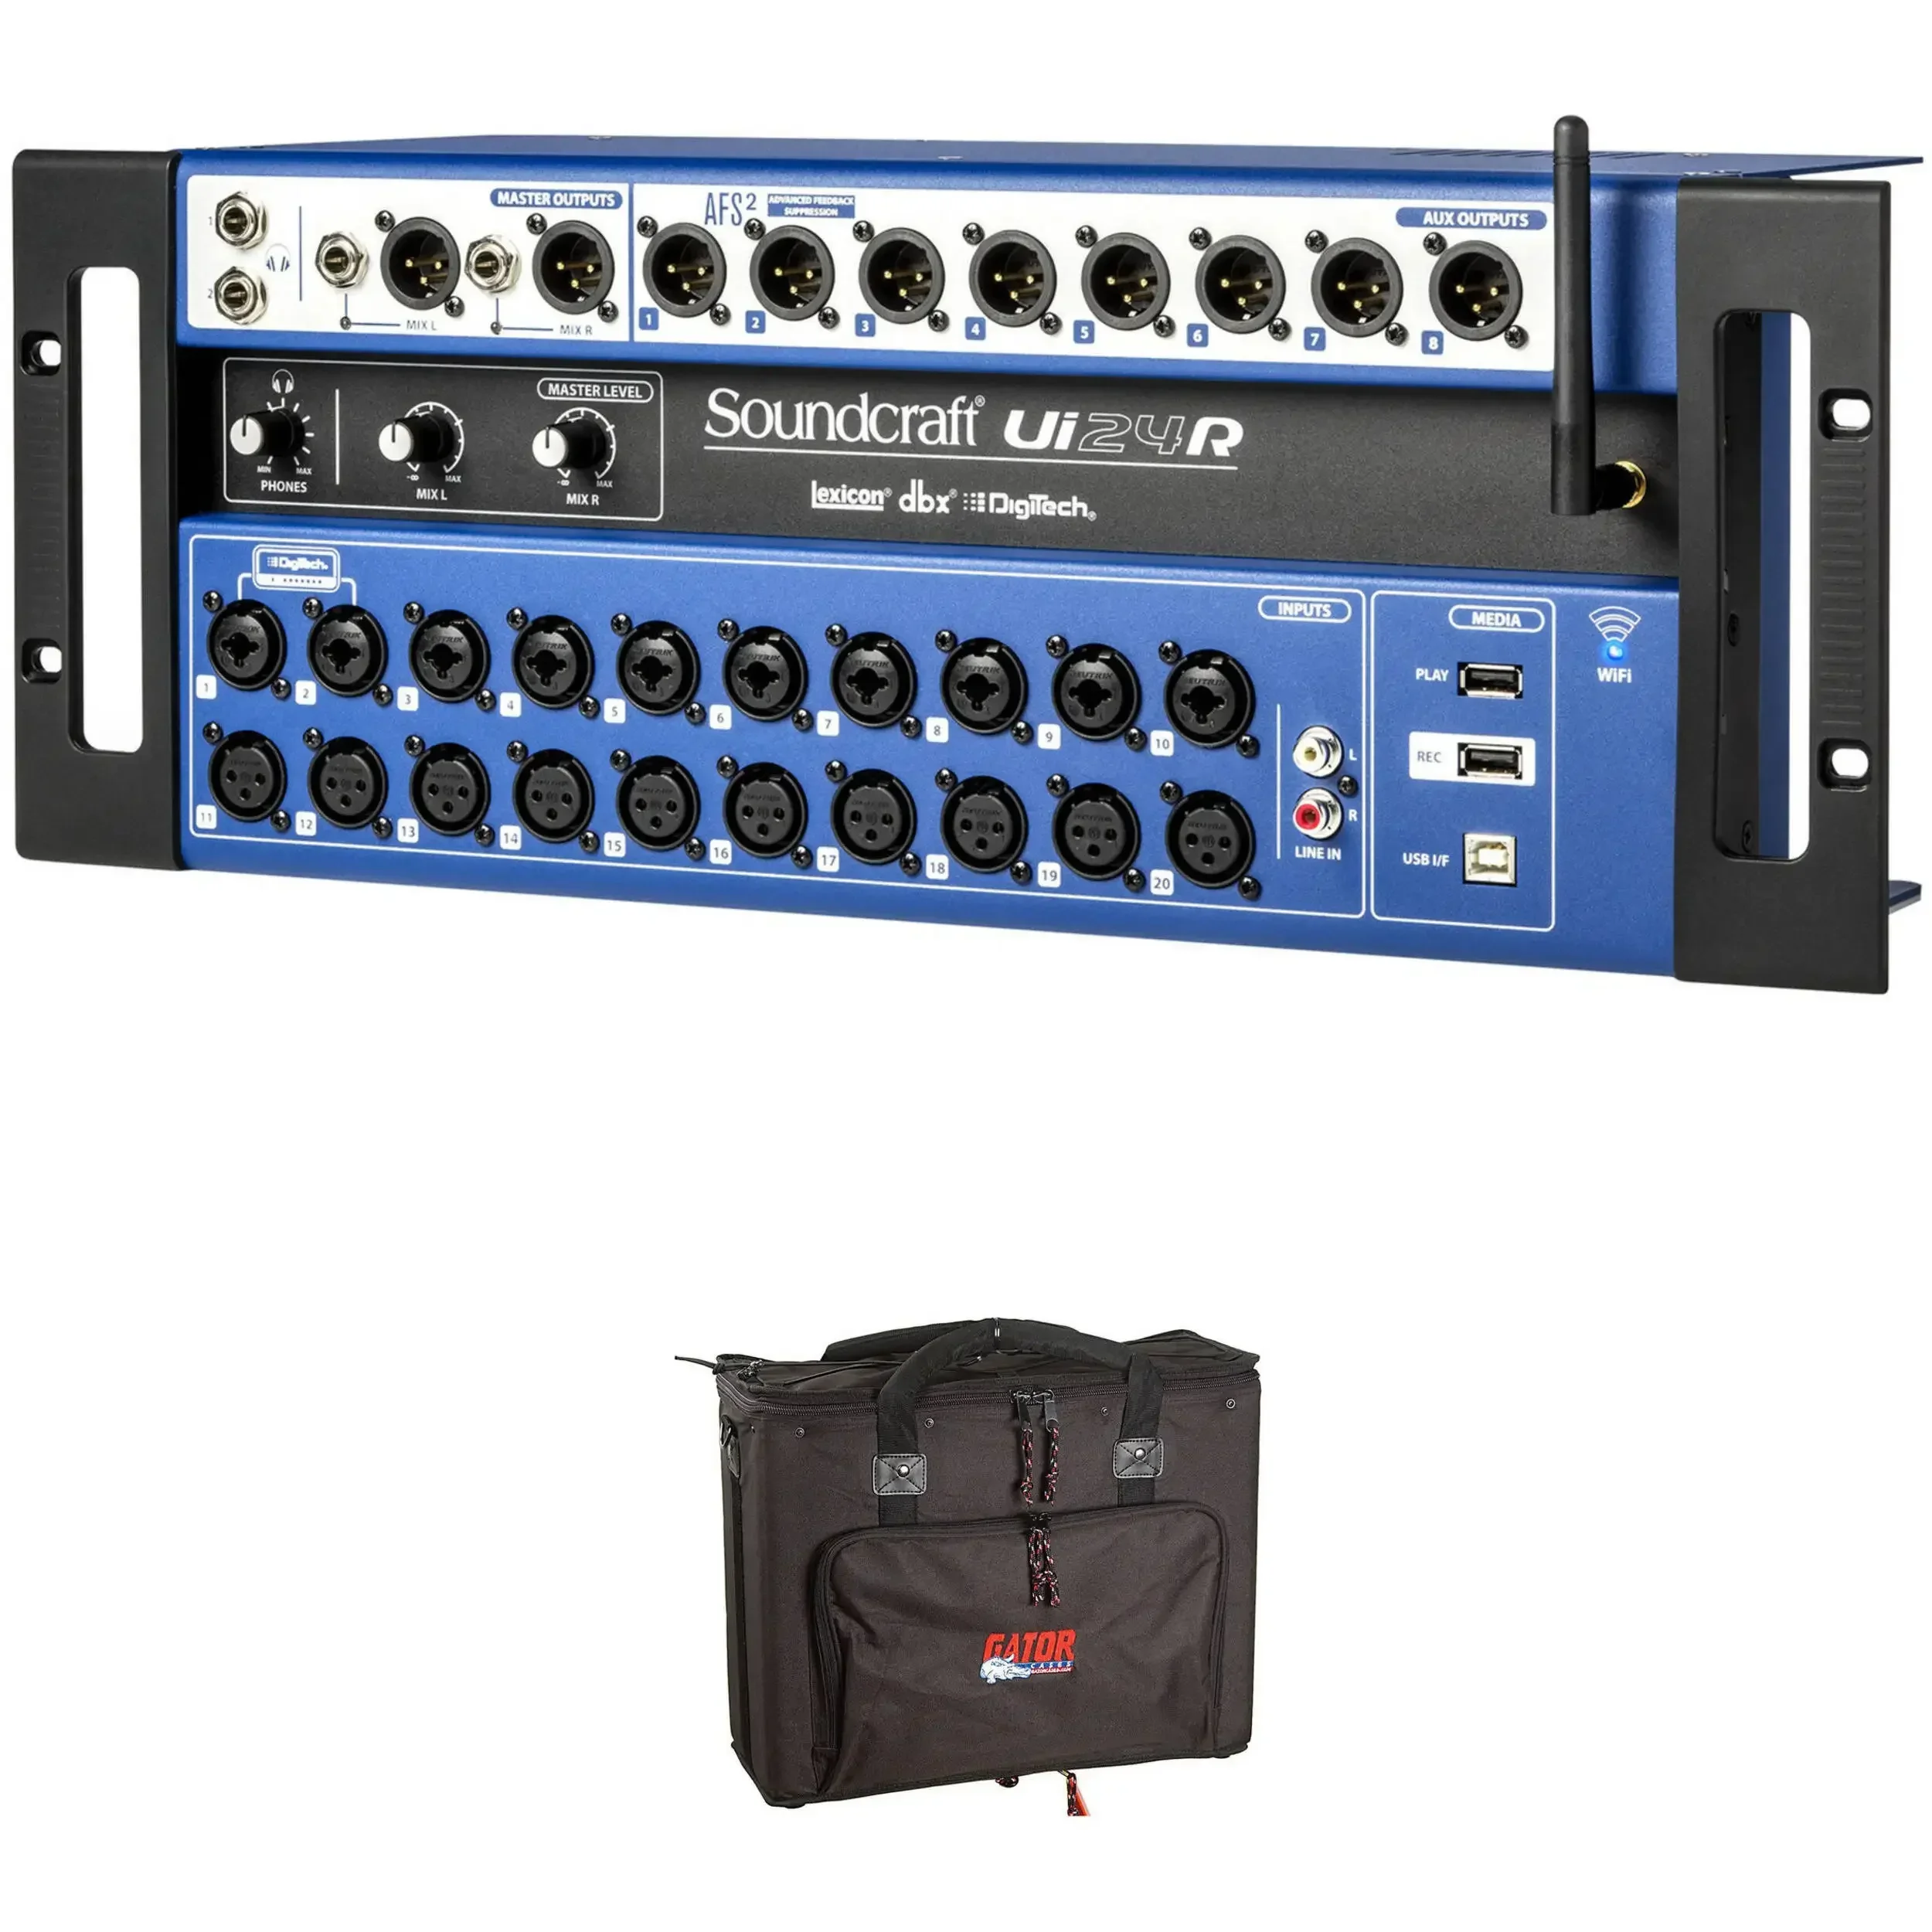 

SUMMER SALES DISCOUNT ON Best Quality Soundcraft Ui24R 24-Channel Mixer Multi-Track USB Recorder with Wireless Control